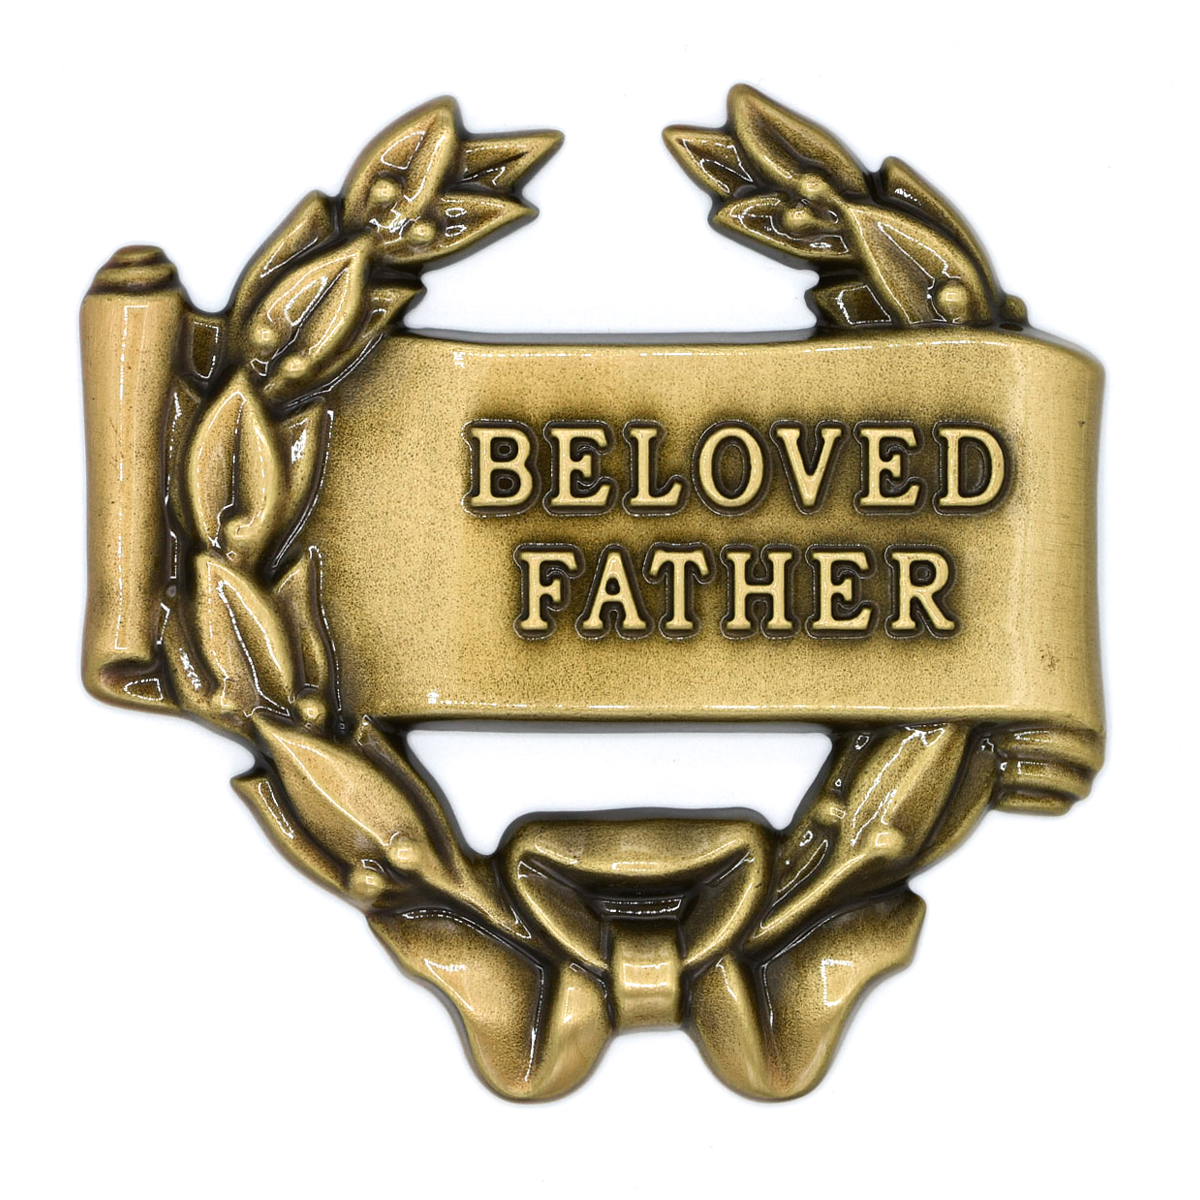 Beloved Father 3.1 x 3.1″